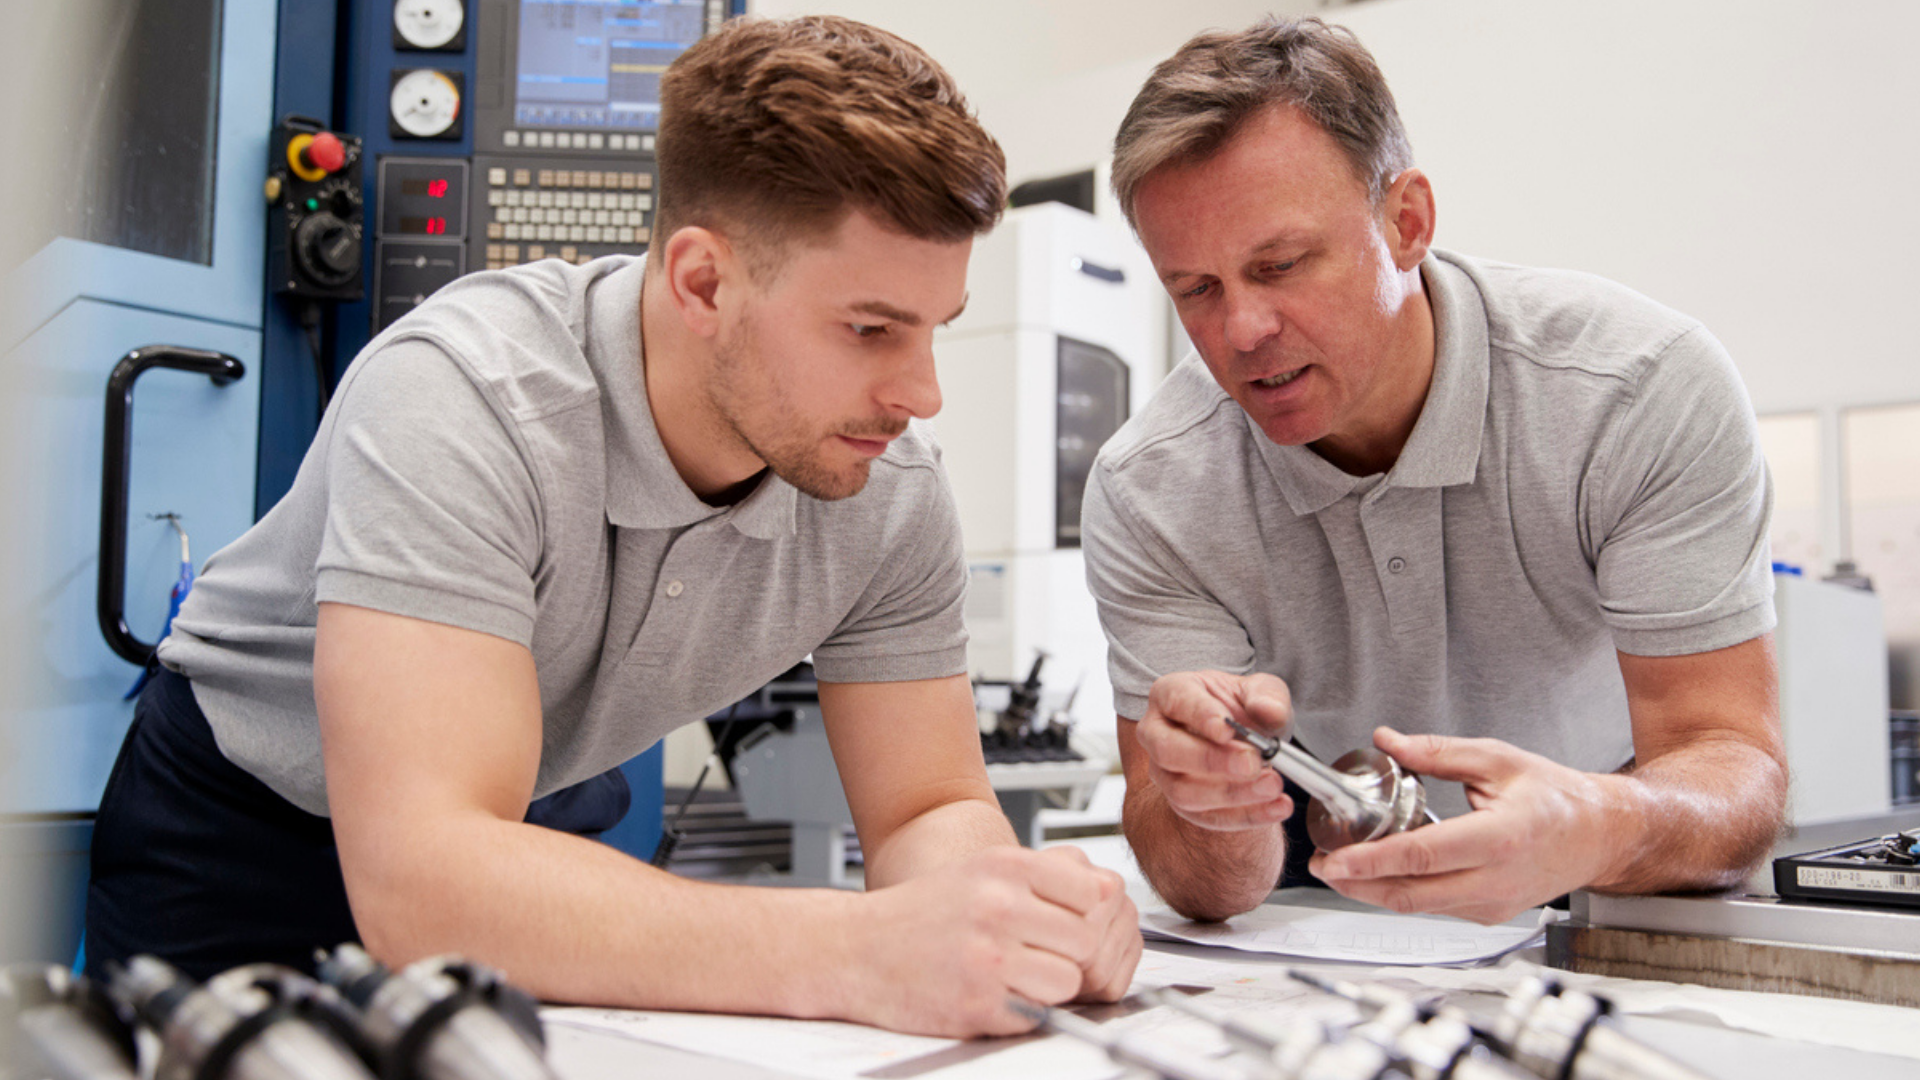 Apprenticeships are a great opportunity to learn skills and earn money, but what do you do once your apprenticeship ends? Image credit: Institute for Apprenticeships and Technical Education